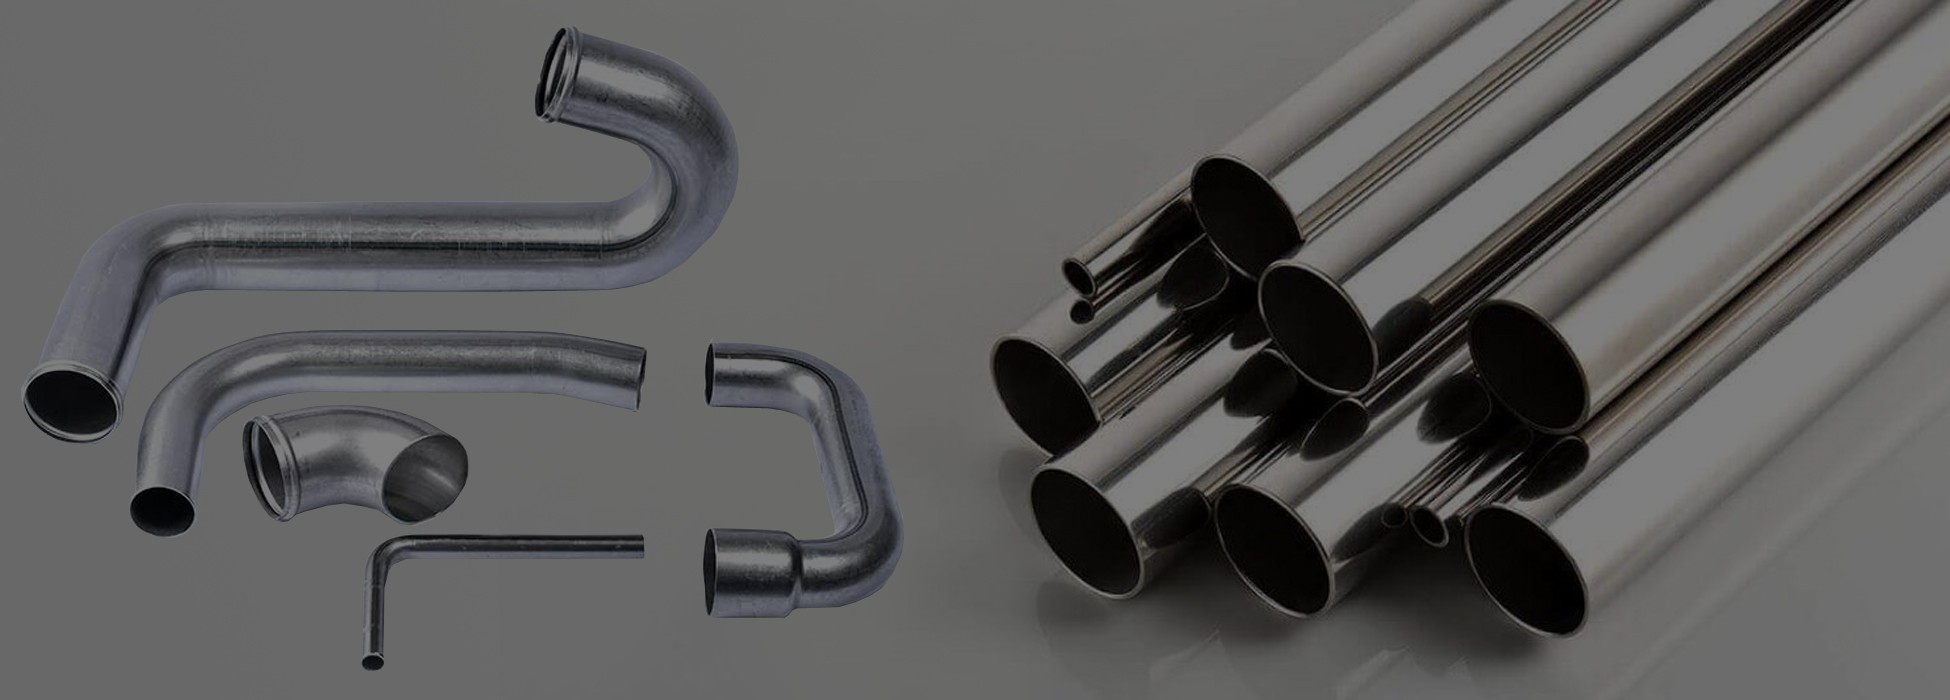 Stainless Steel Tubes, Stainless Steel Pipes, Square S.S.Tubes, S.S.Tubes, SS Tubes, SS Pipes